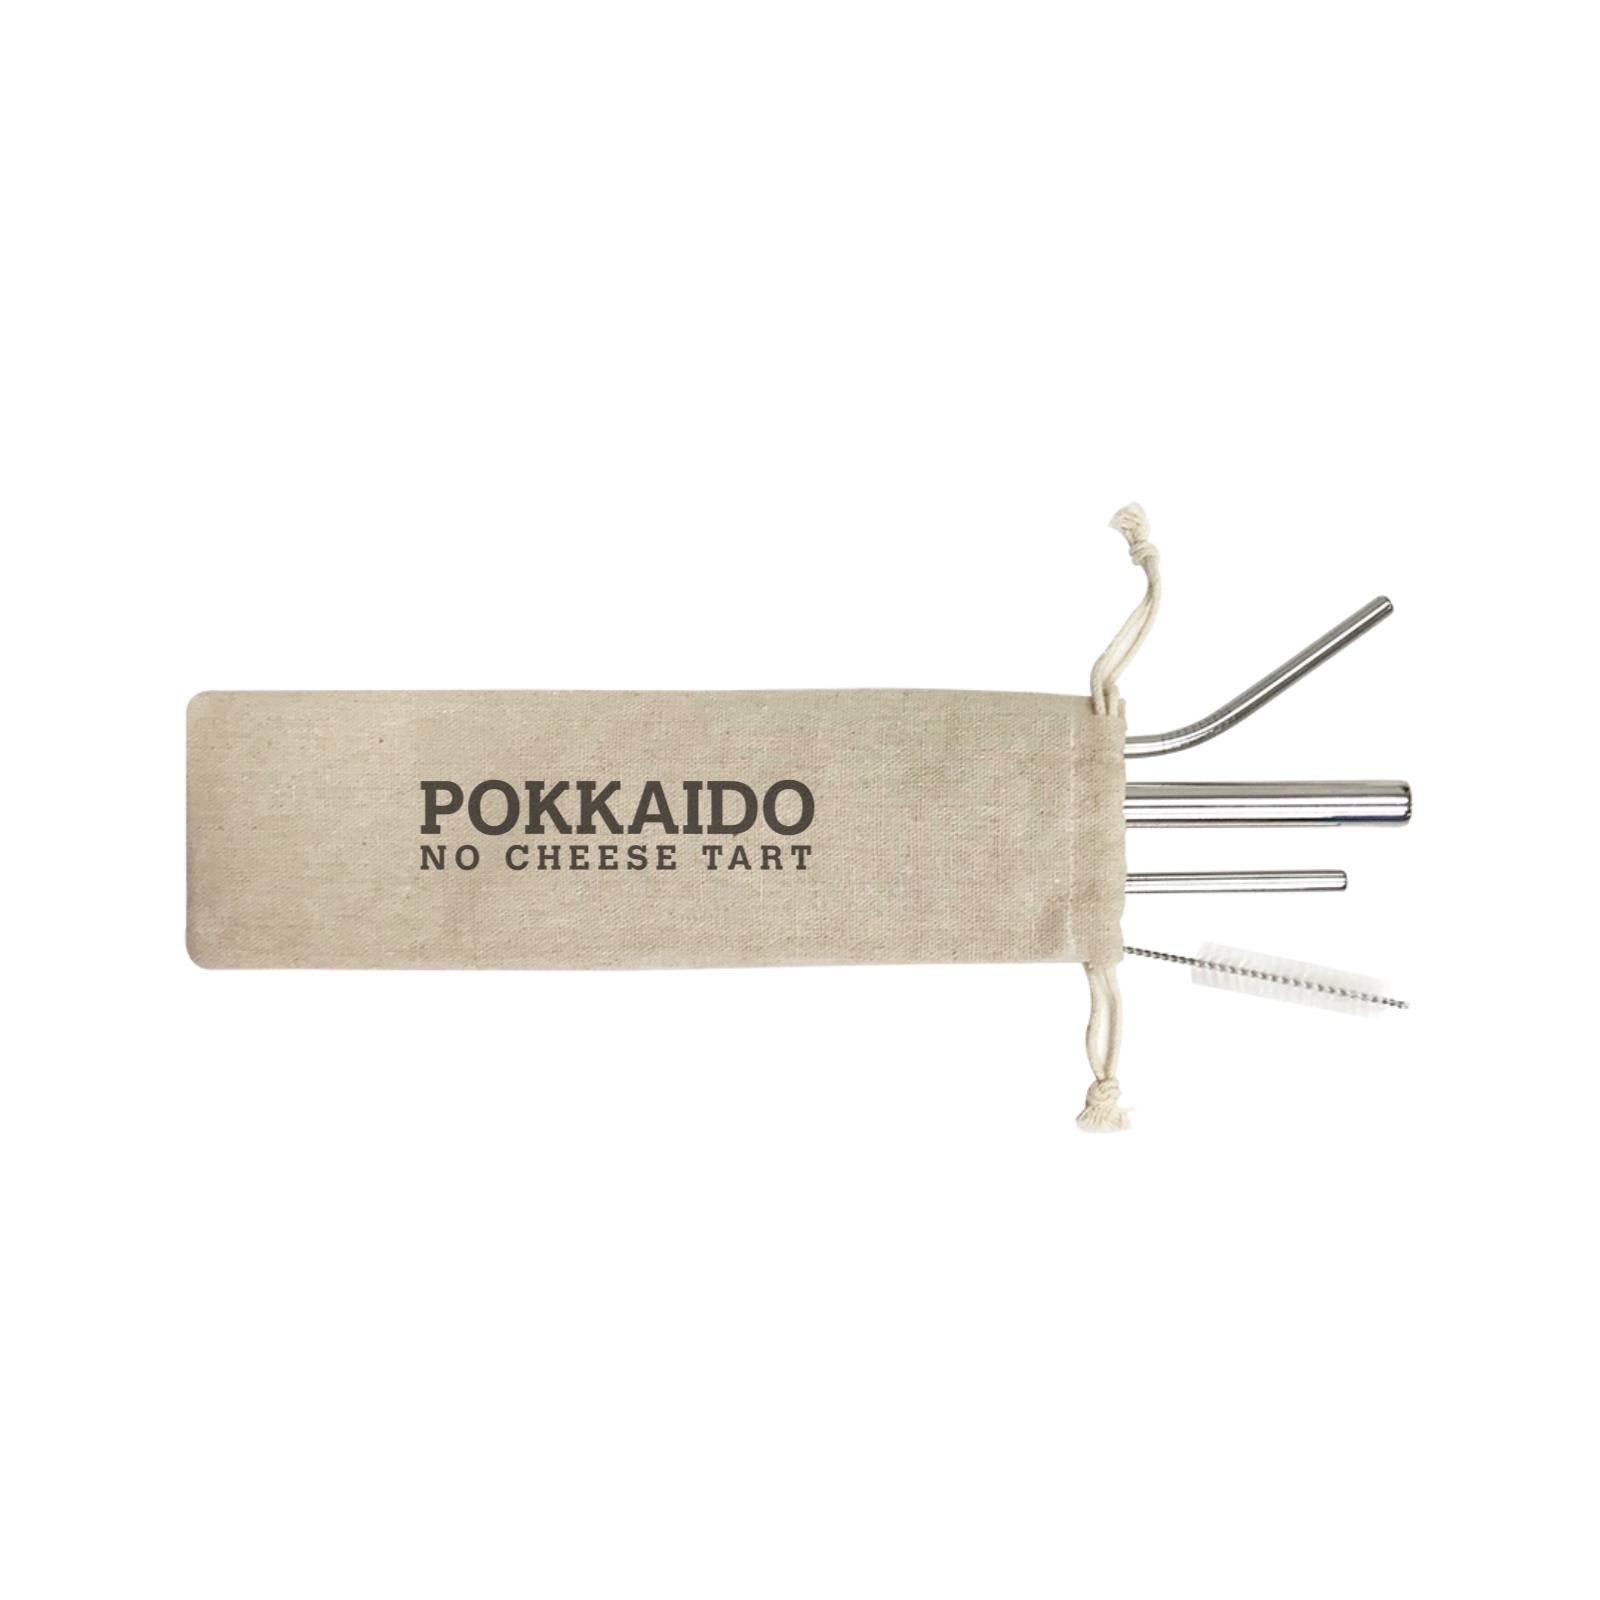 Slang Statement Pokkaido No Cheese Tart 4-in-1 Stainless Steel Straw Set In a Satchel